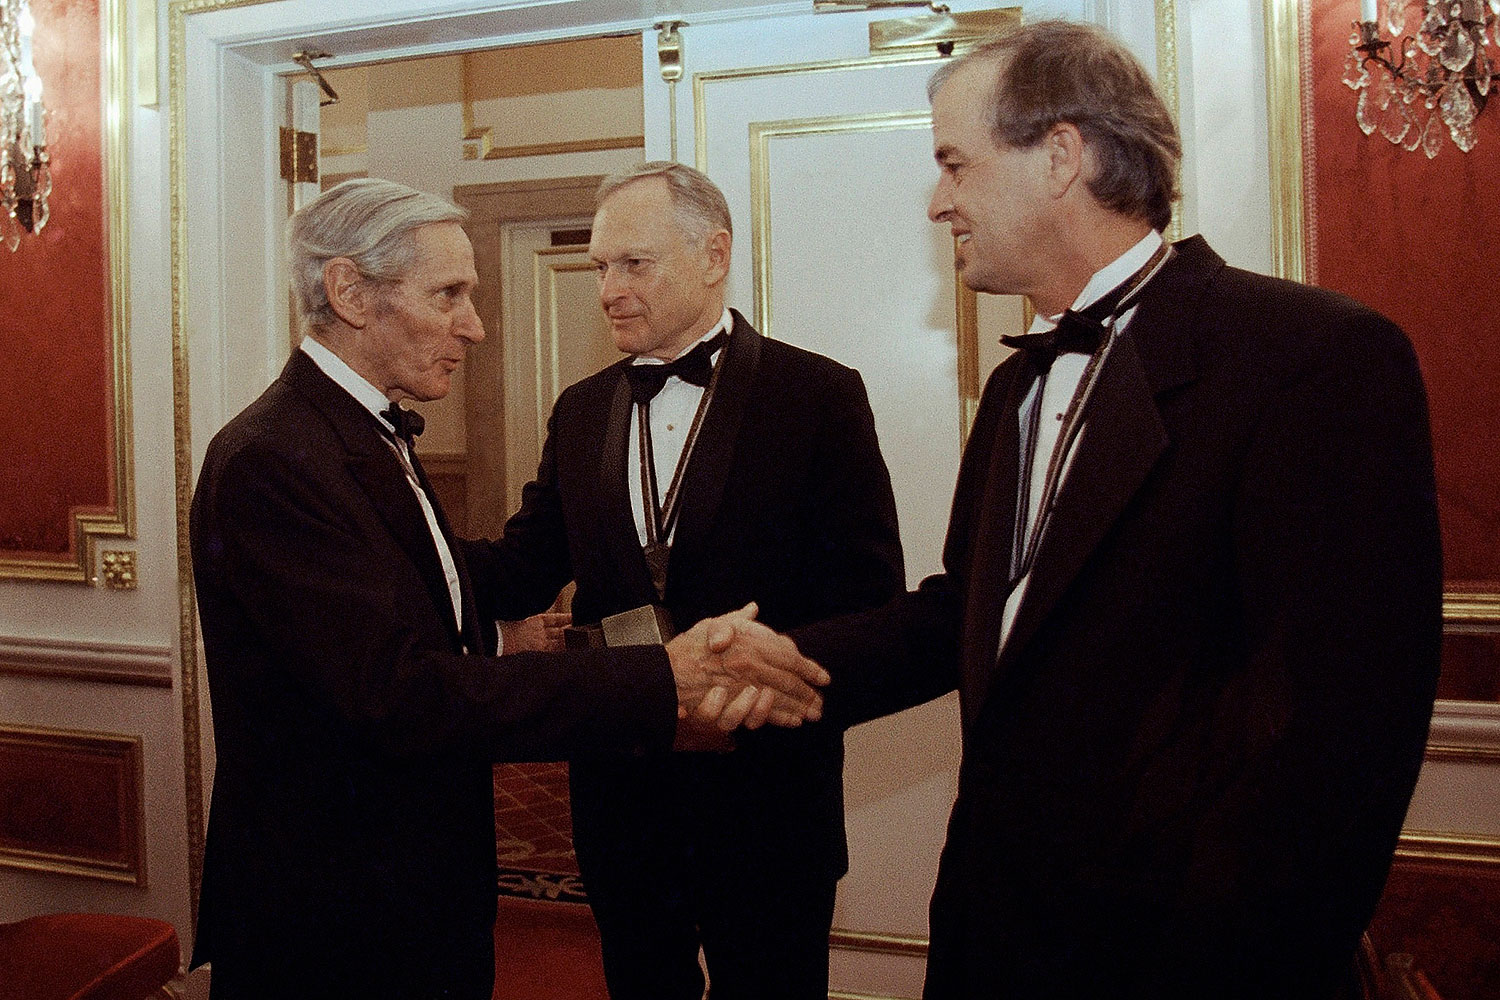 In this Nov. 16, 1994, file photo, The National Book Awards prize winning writers Sherwin B. Nuland, center, William Gaddis, left, and James Tate greet each other after the awards ceremony in New York. Nuland, has died at age 83 (Adam Nadel / AP)